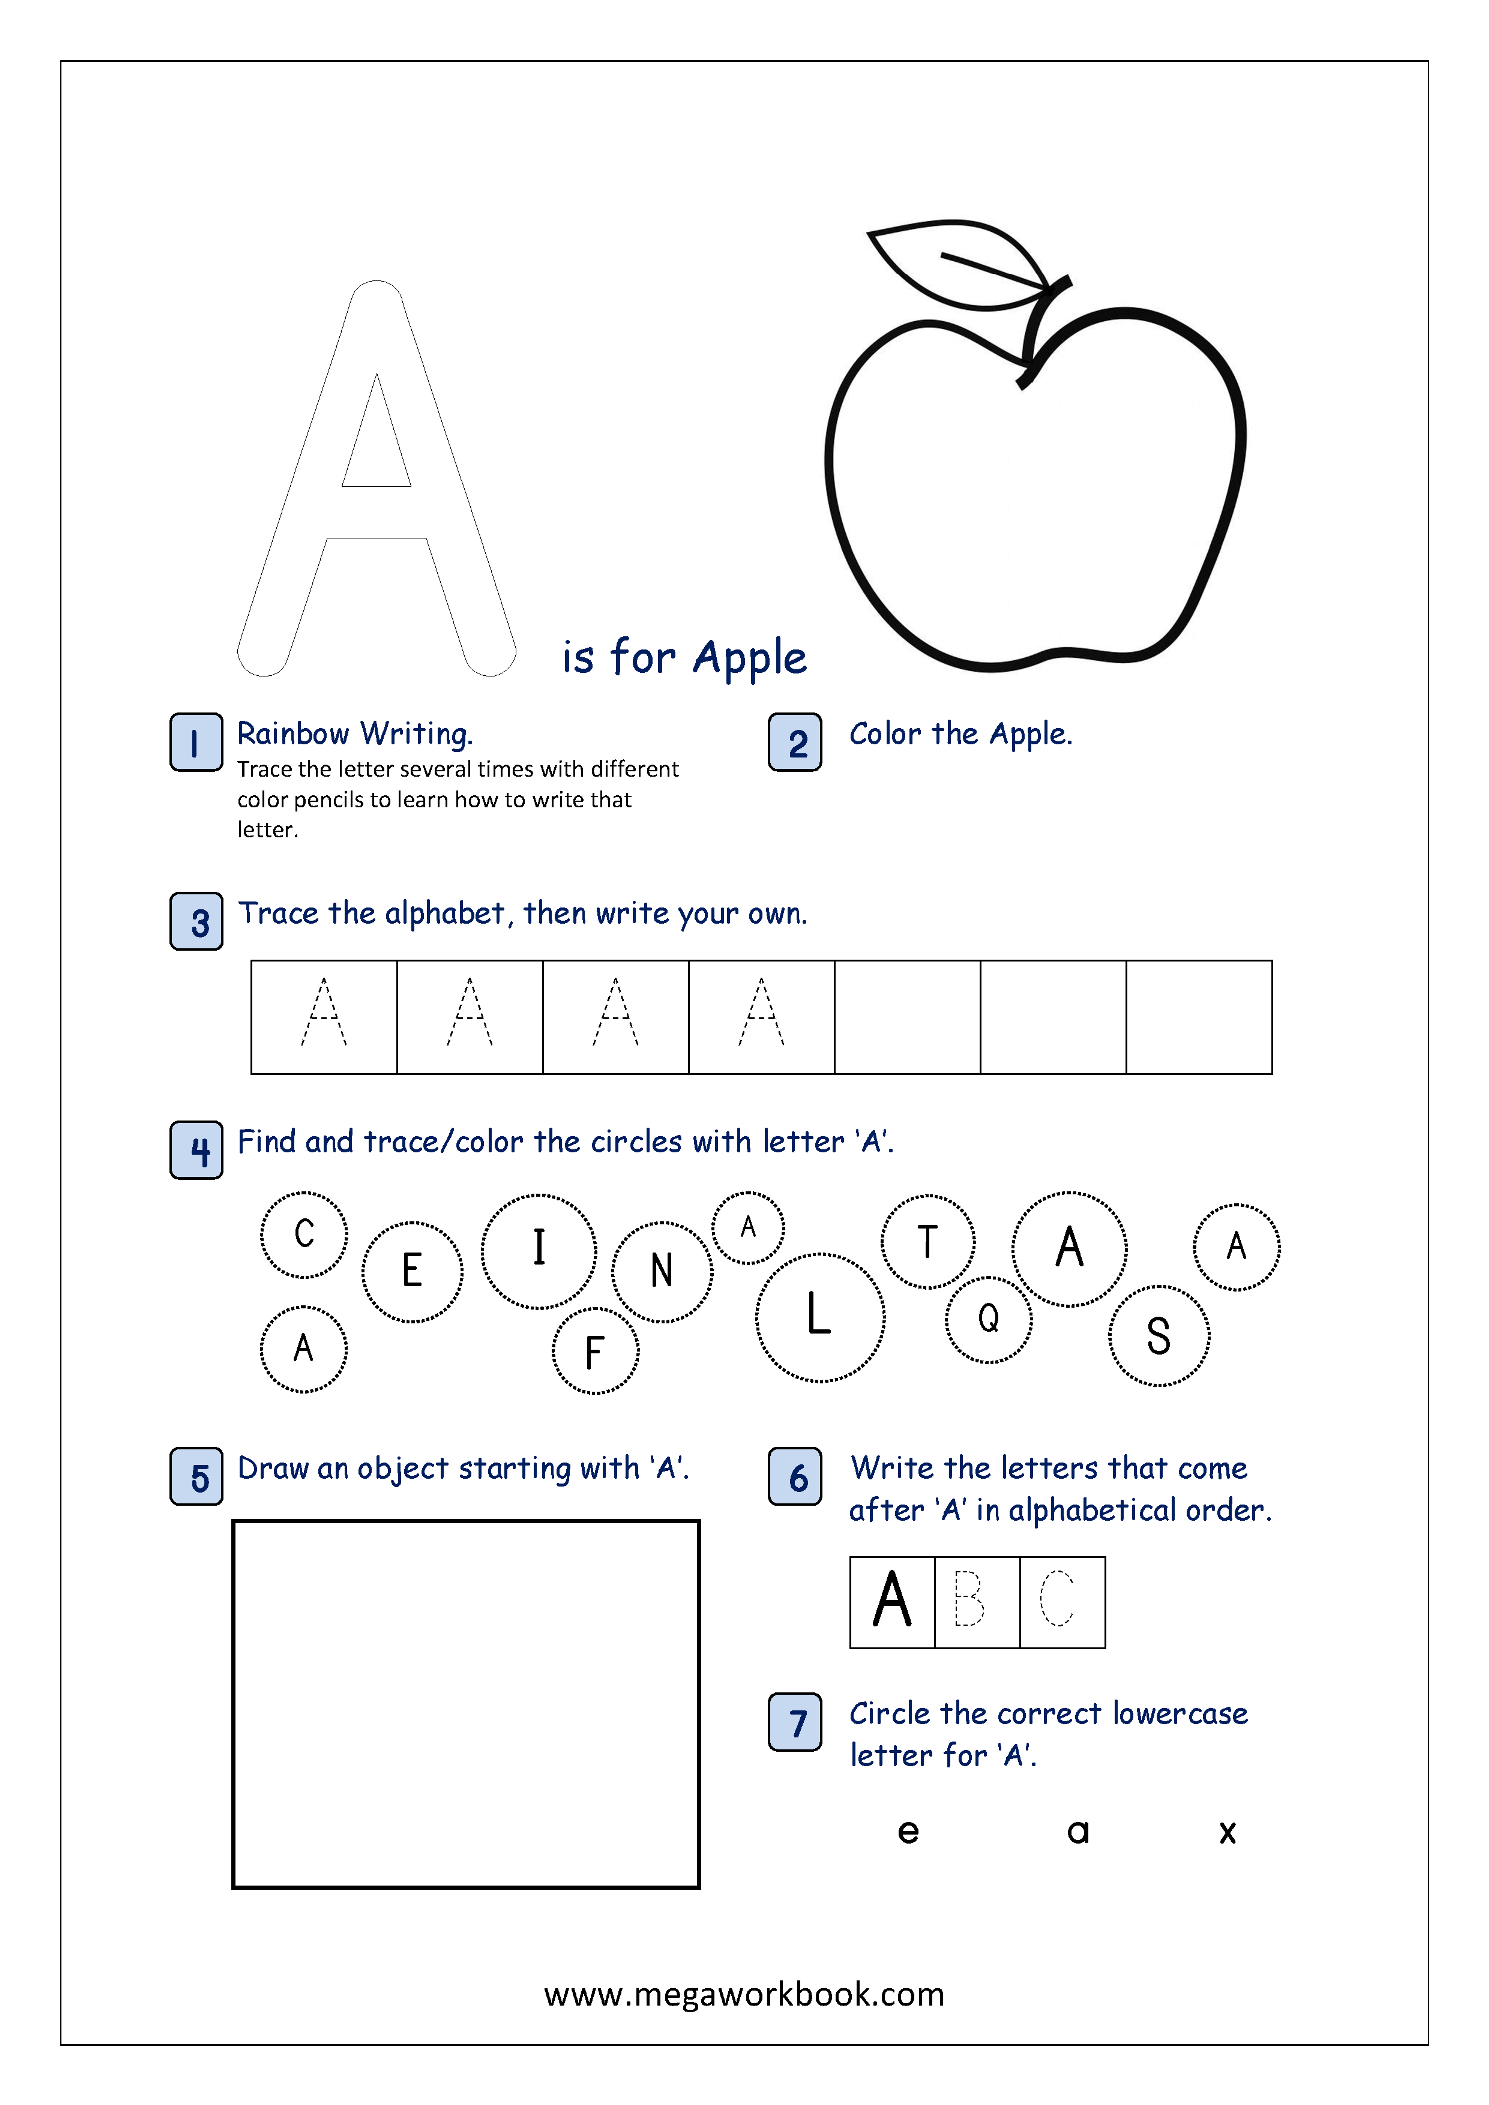 Free Printable Alphabet Recognition Worksheets For Capital regarding Letter Tracing Activity Worksheets